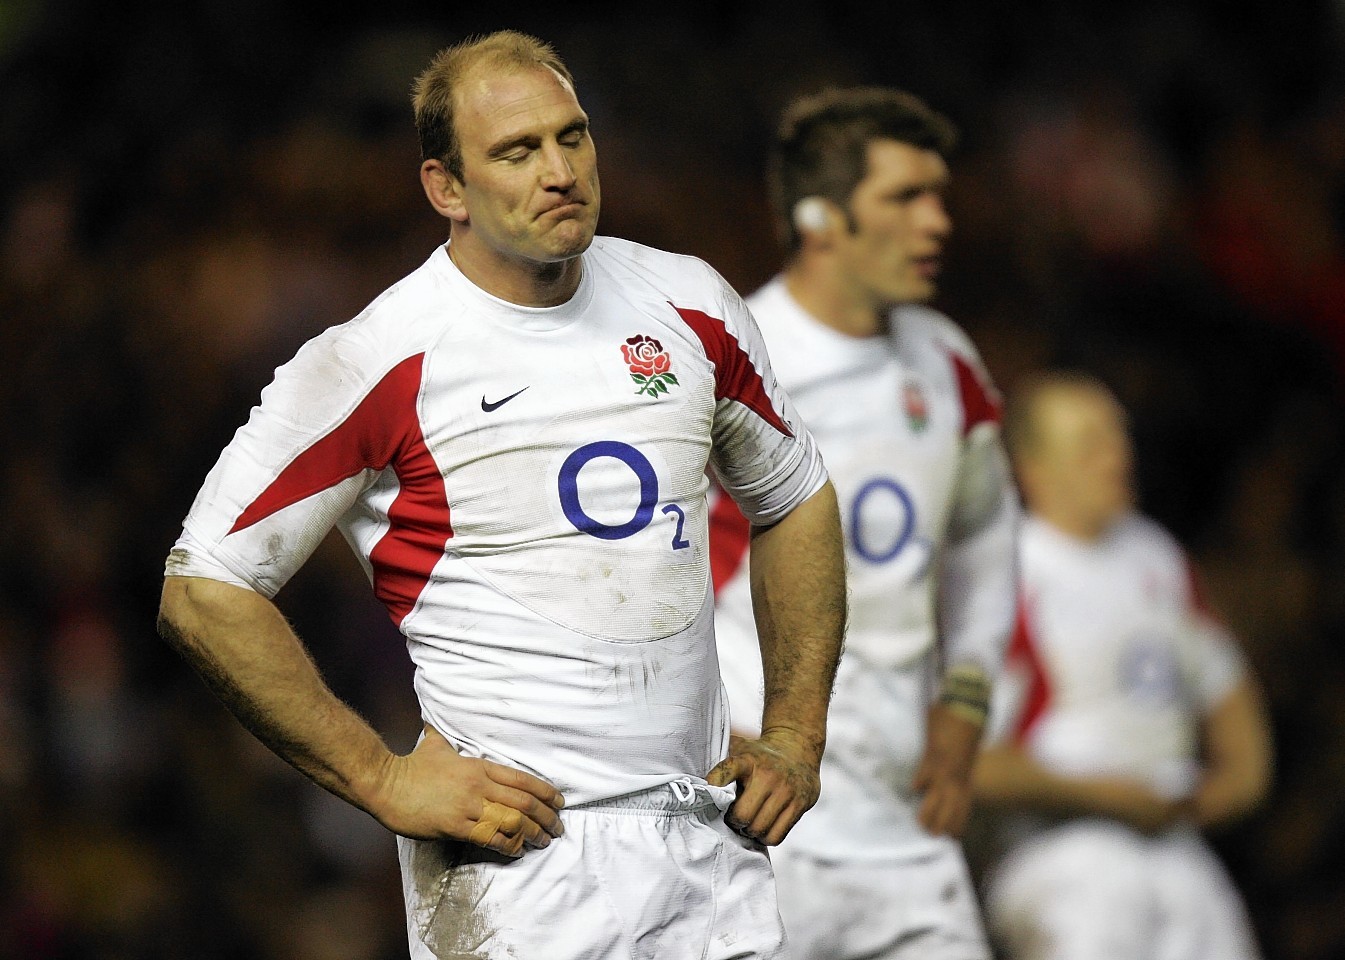 England's Lawrence Dallaglio left deflated after defeat at the hands of Scotland 